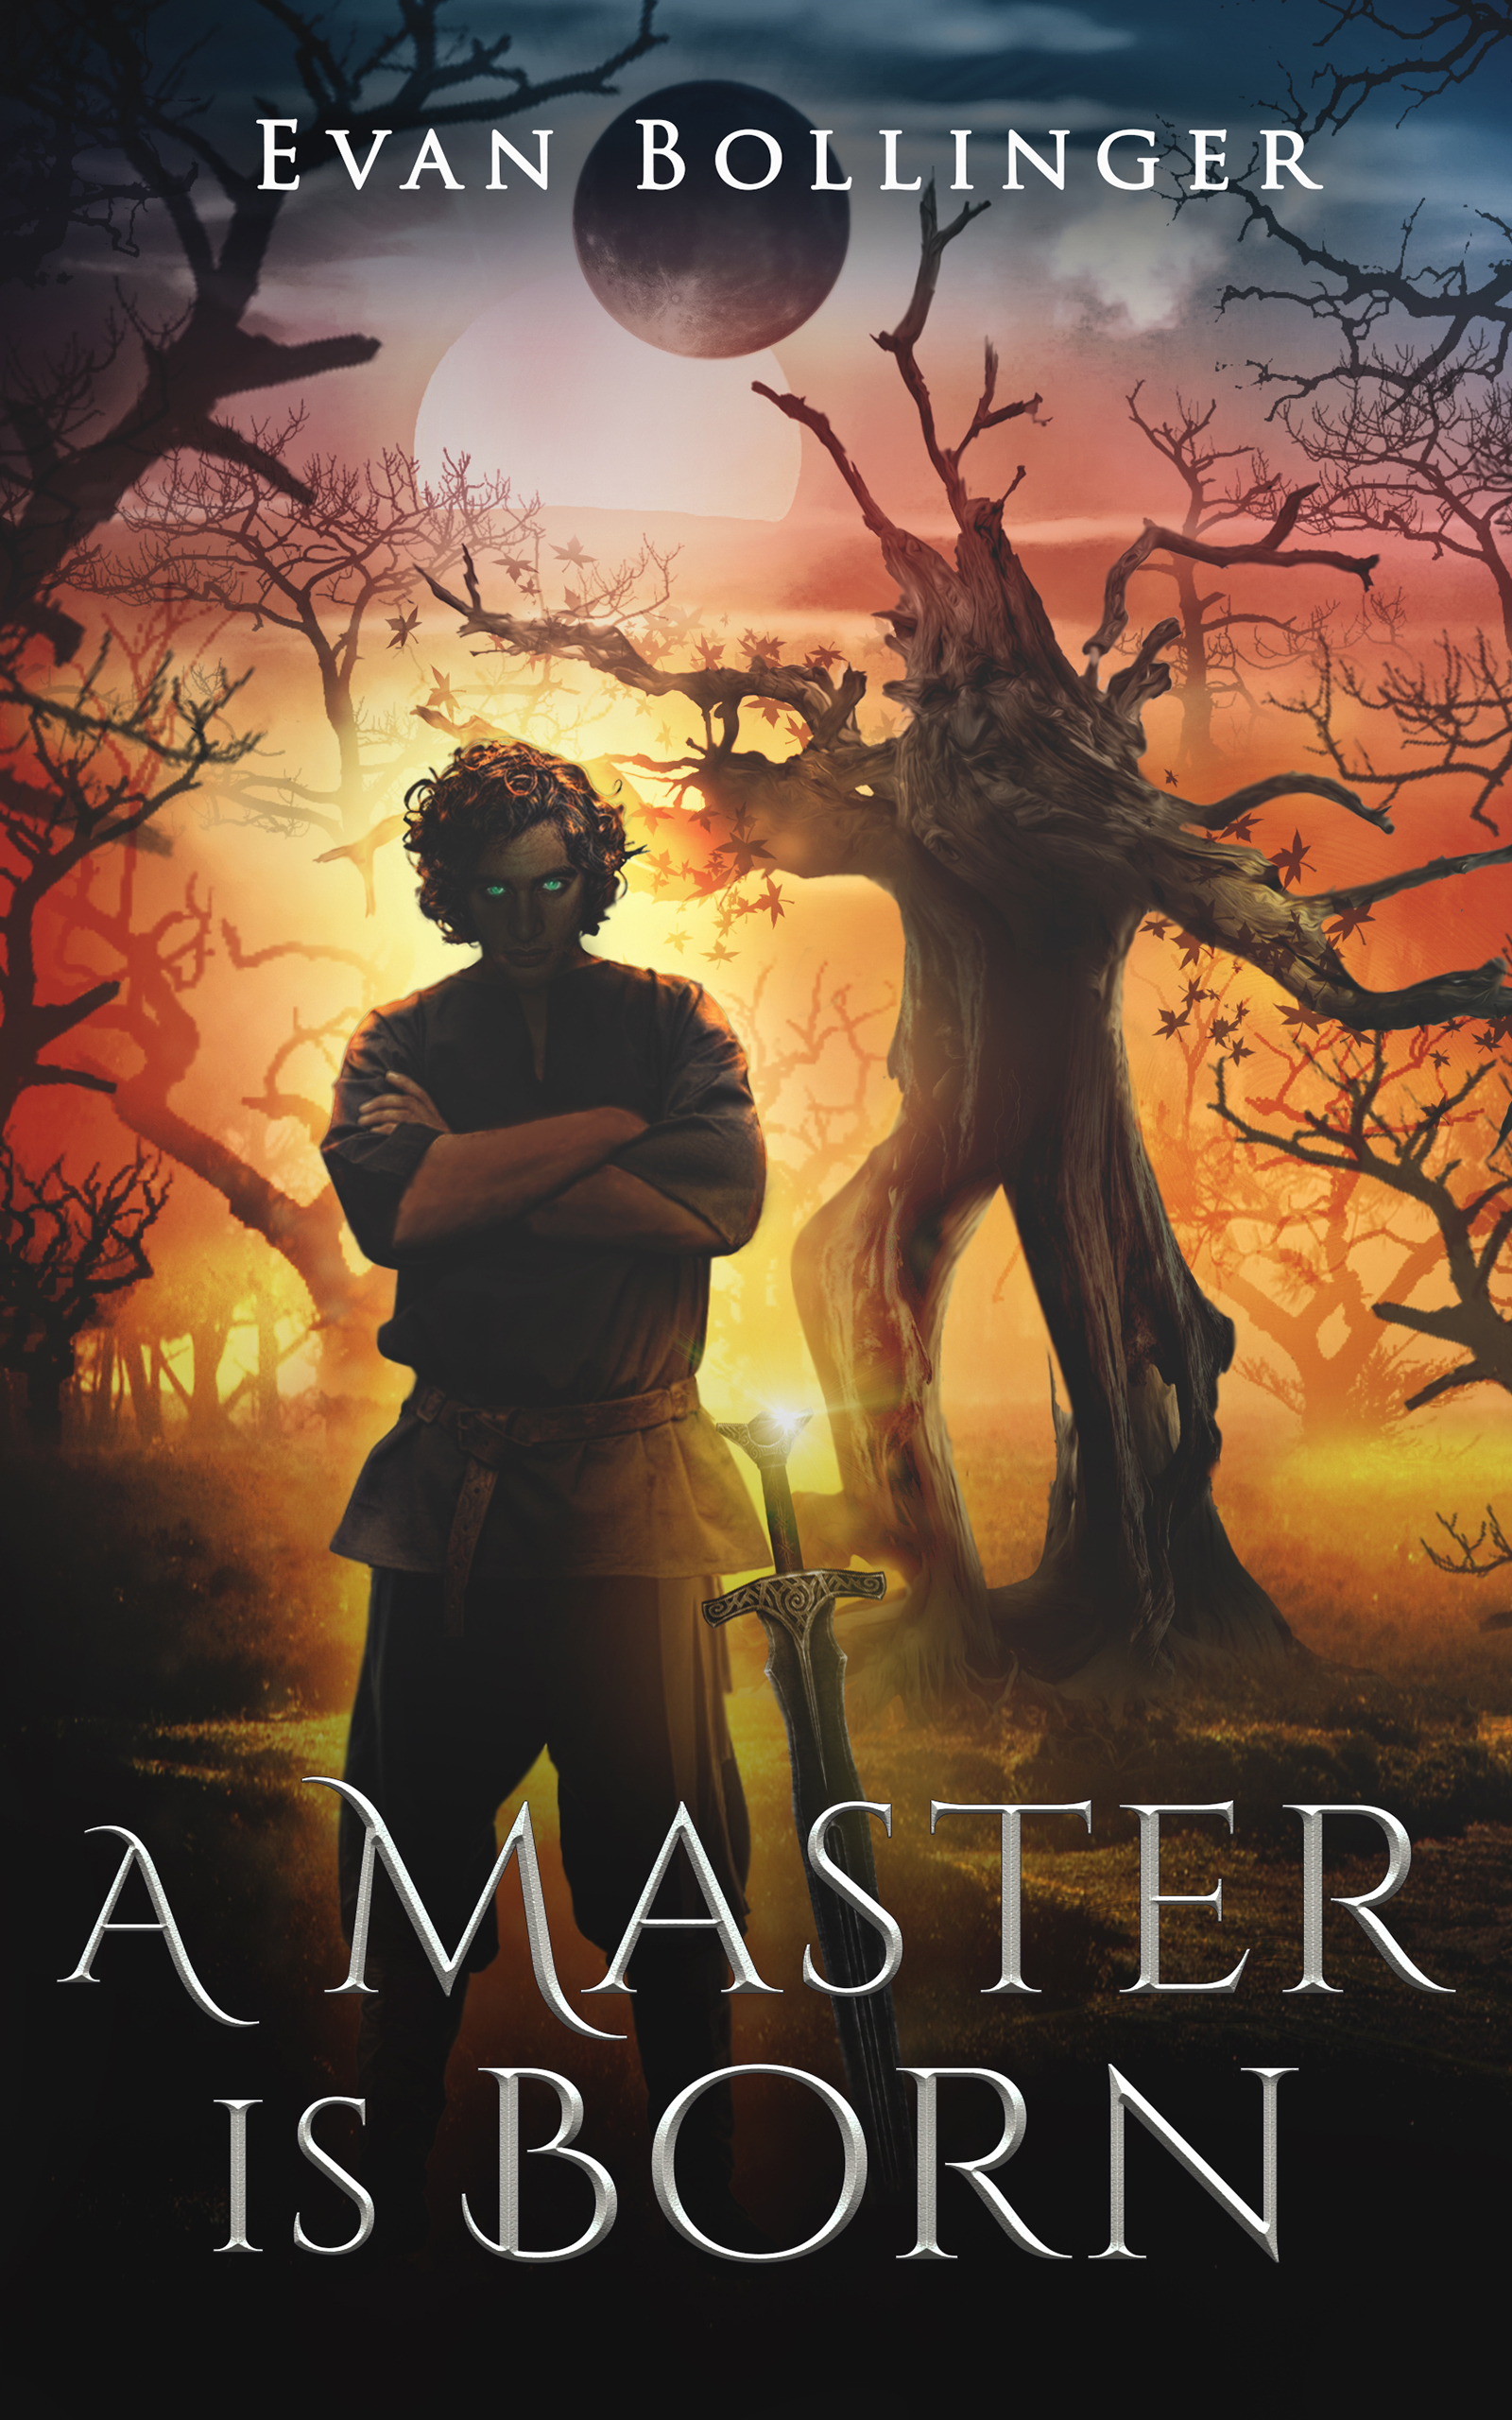 FREE: A Master Is Born by Evan Bollinger